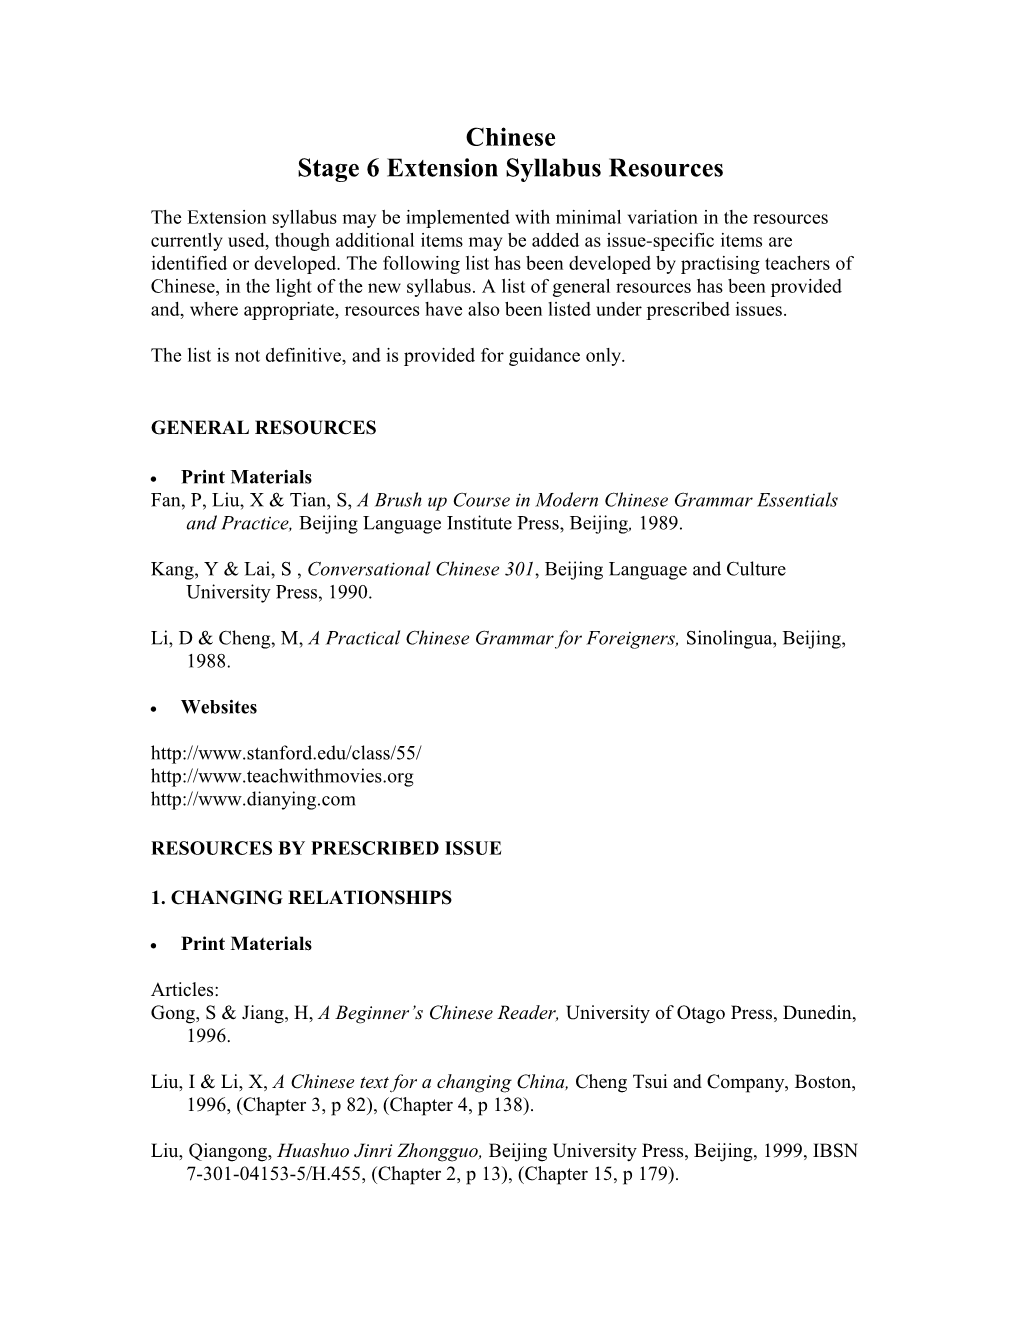 Stage 6 Extension Syllabus Resources